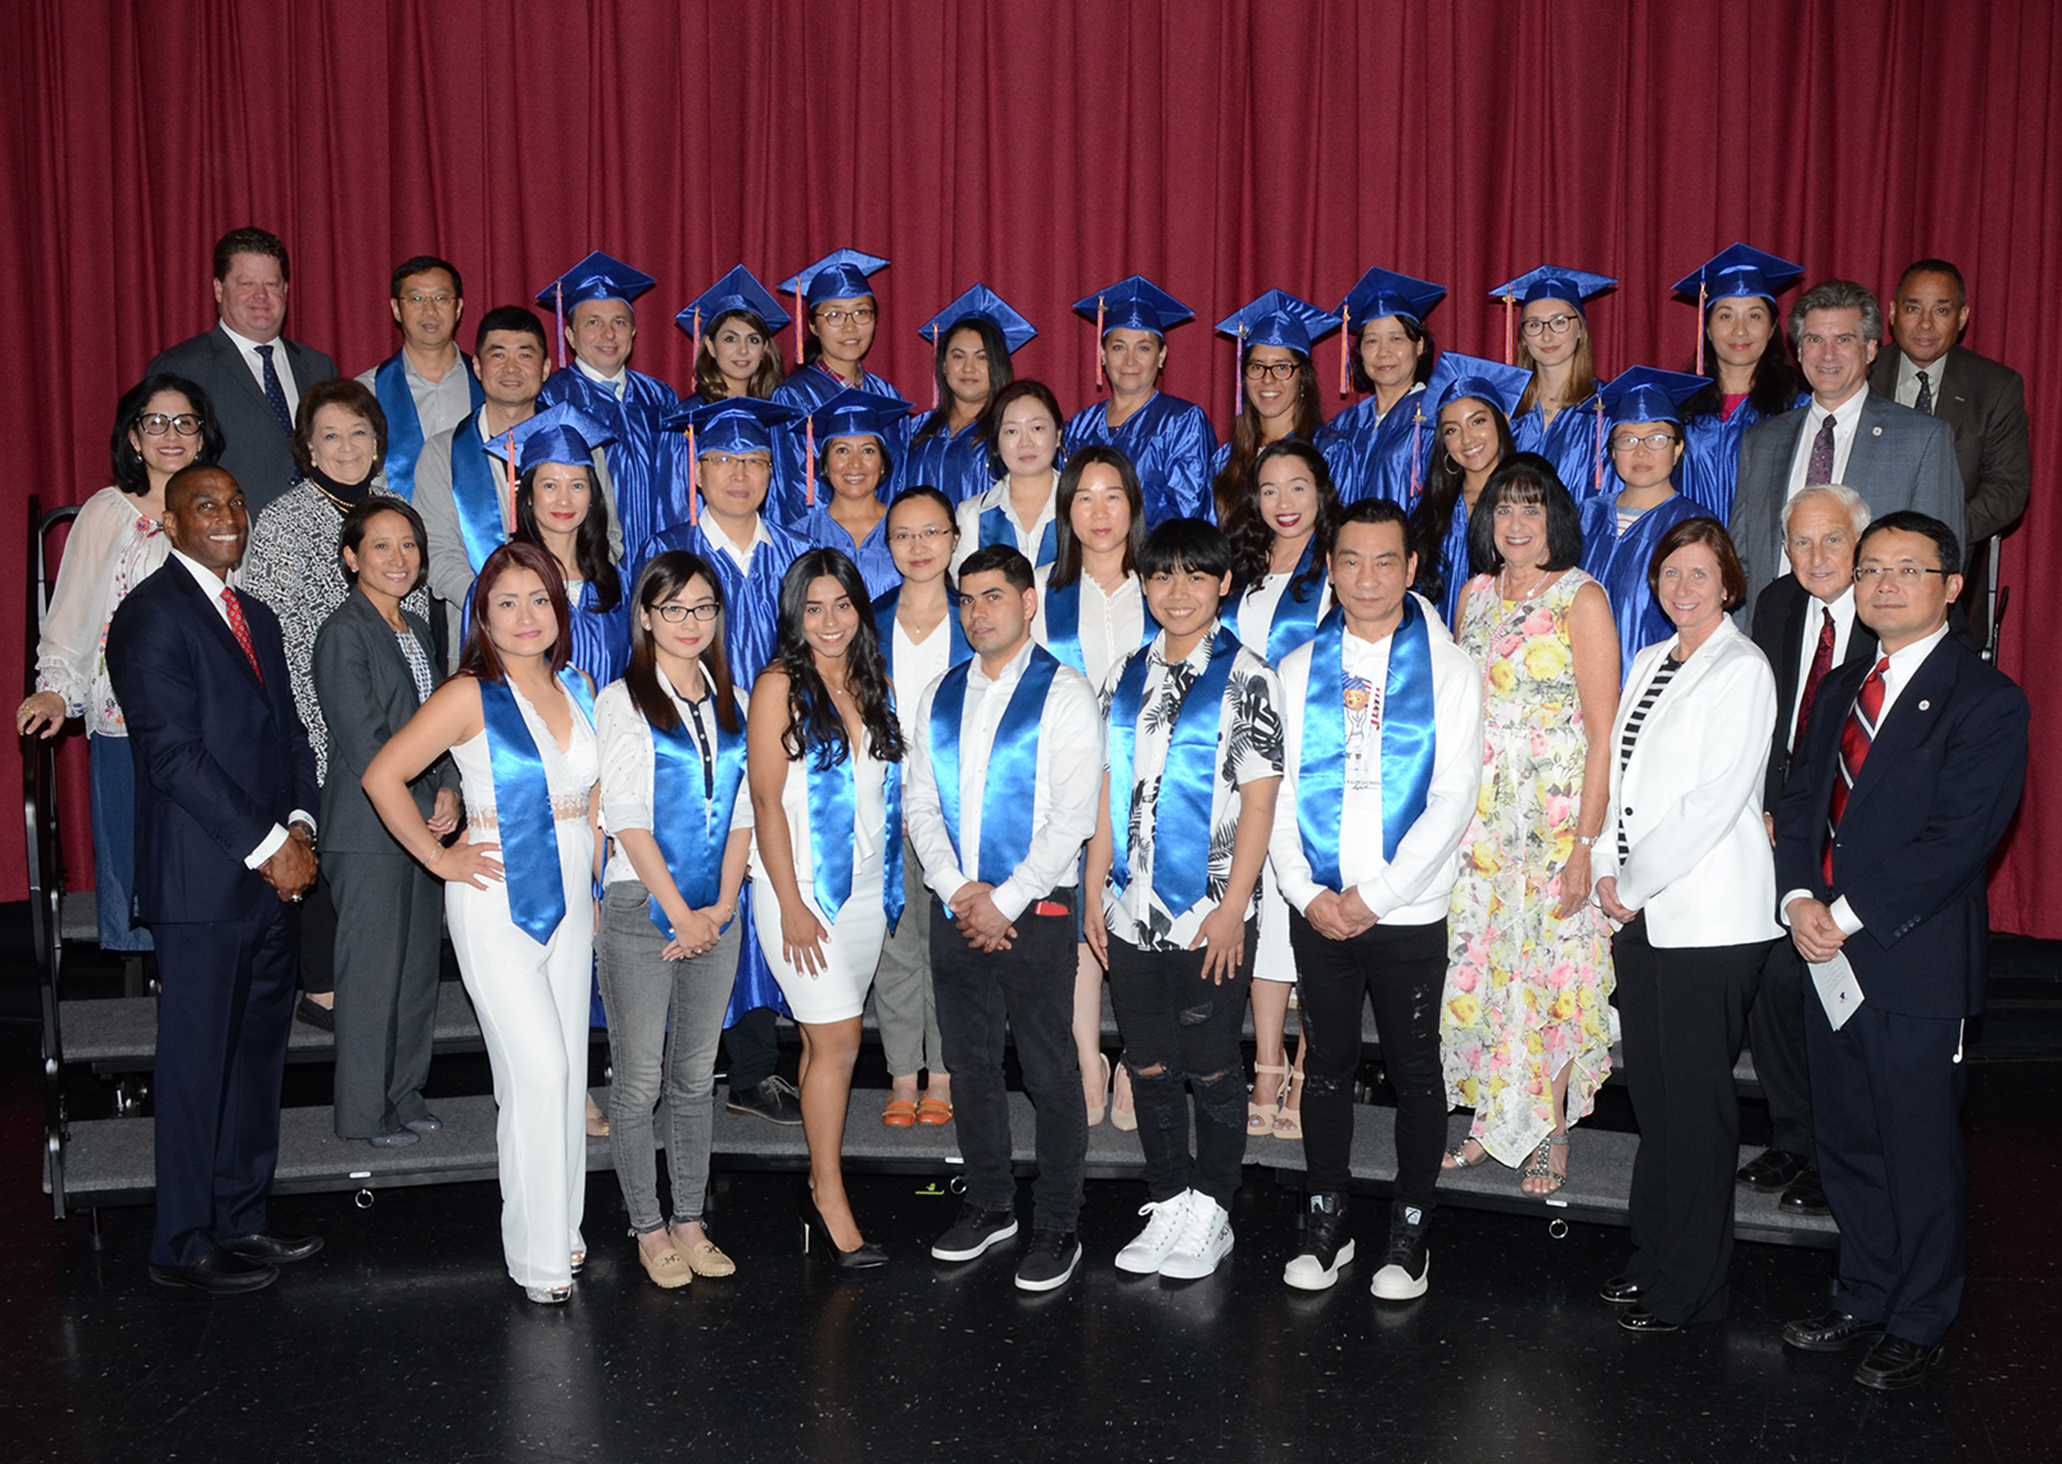 Great Neck Adult Learning Center graduates. (Photo by Irwin Mendlinger)